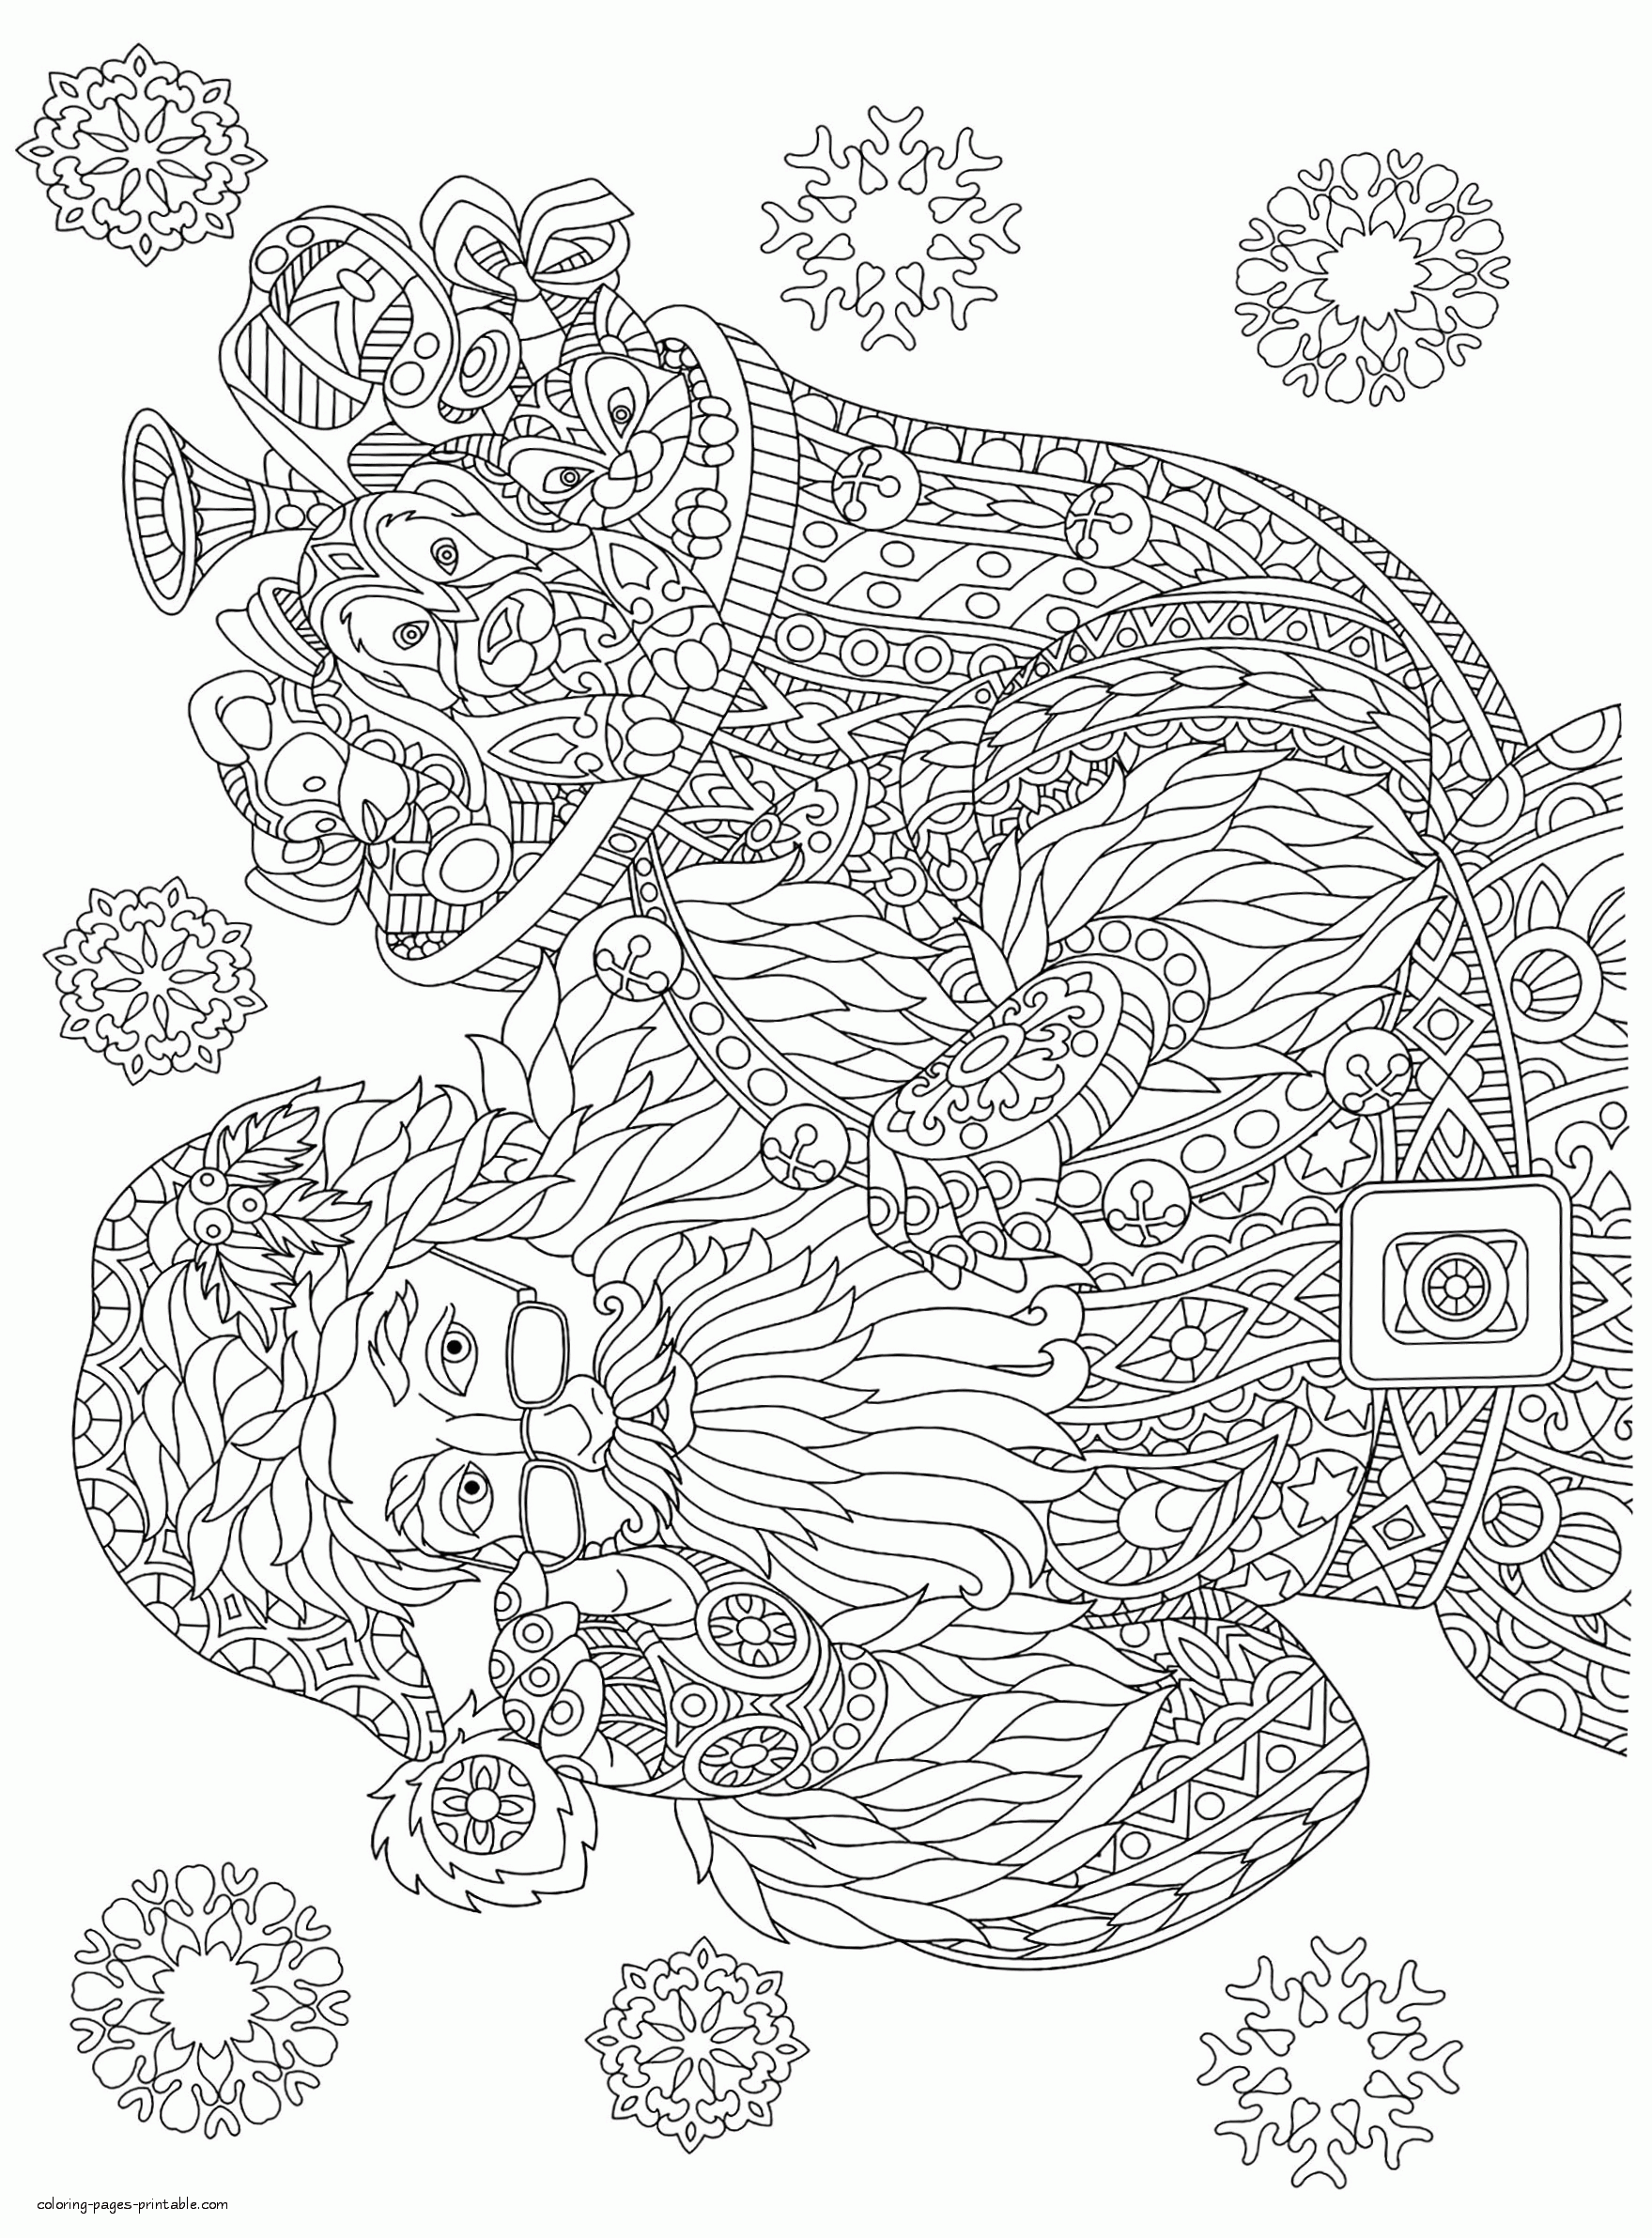 Printable Christmas Coloring Pages For Adults : Top 28 Places To Print Free Christmas Coloring Pages